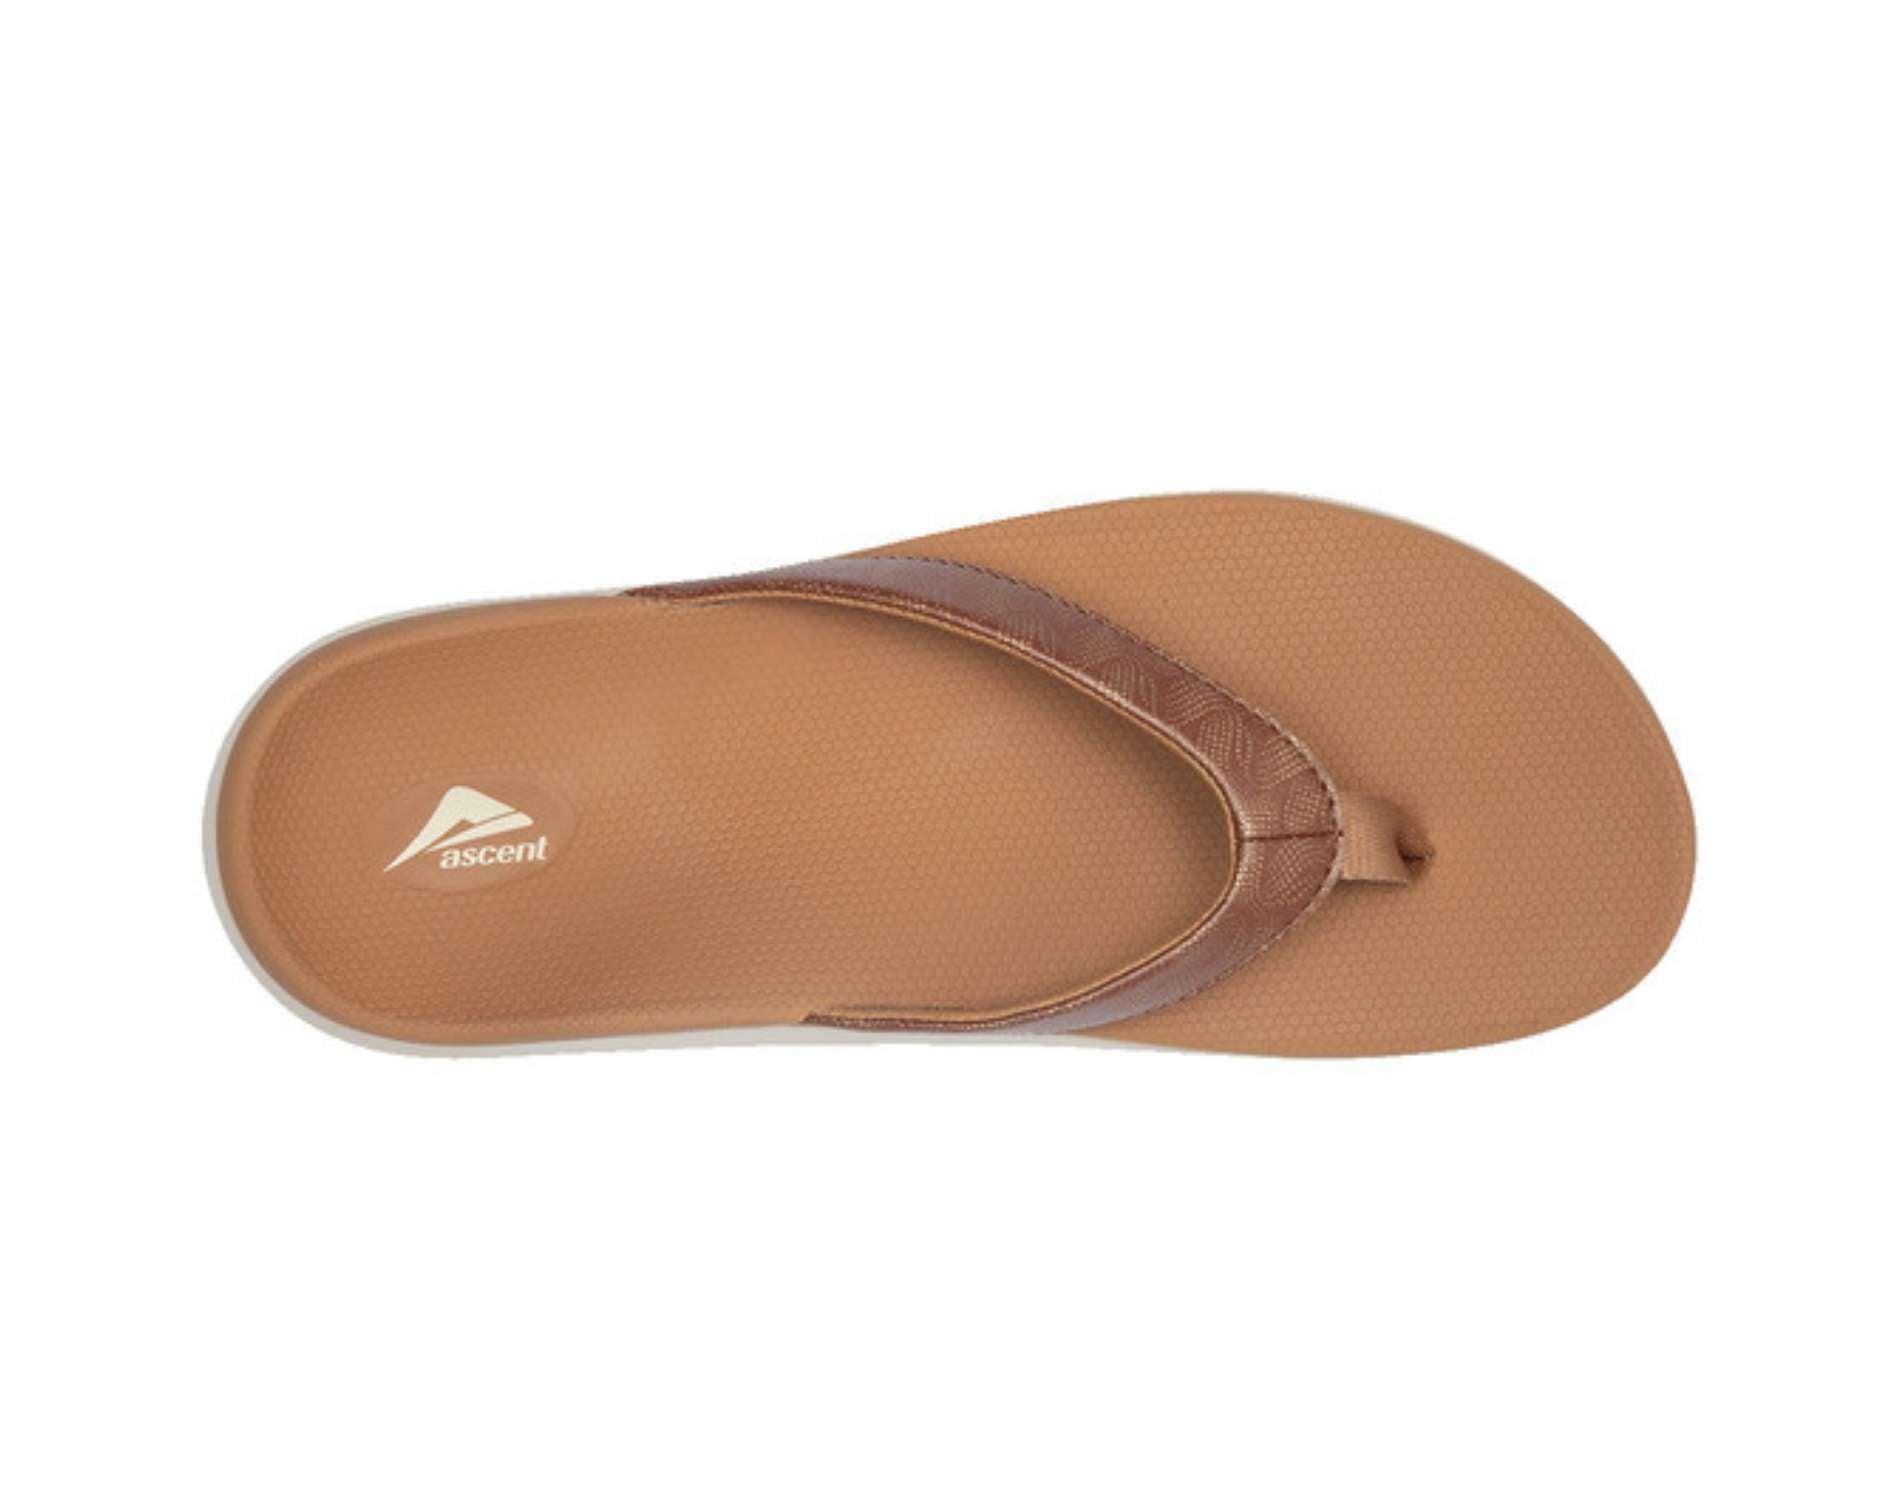 Ascent's Groove sandals for women in caramel colour